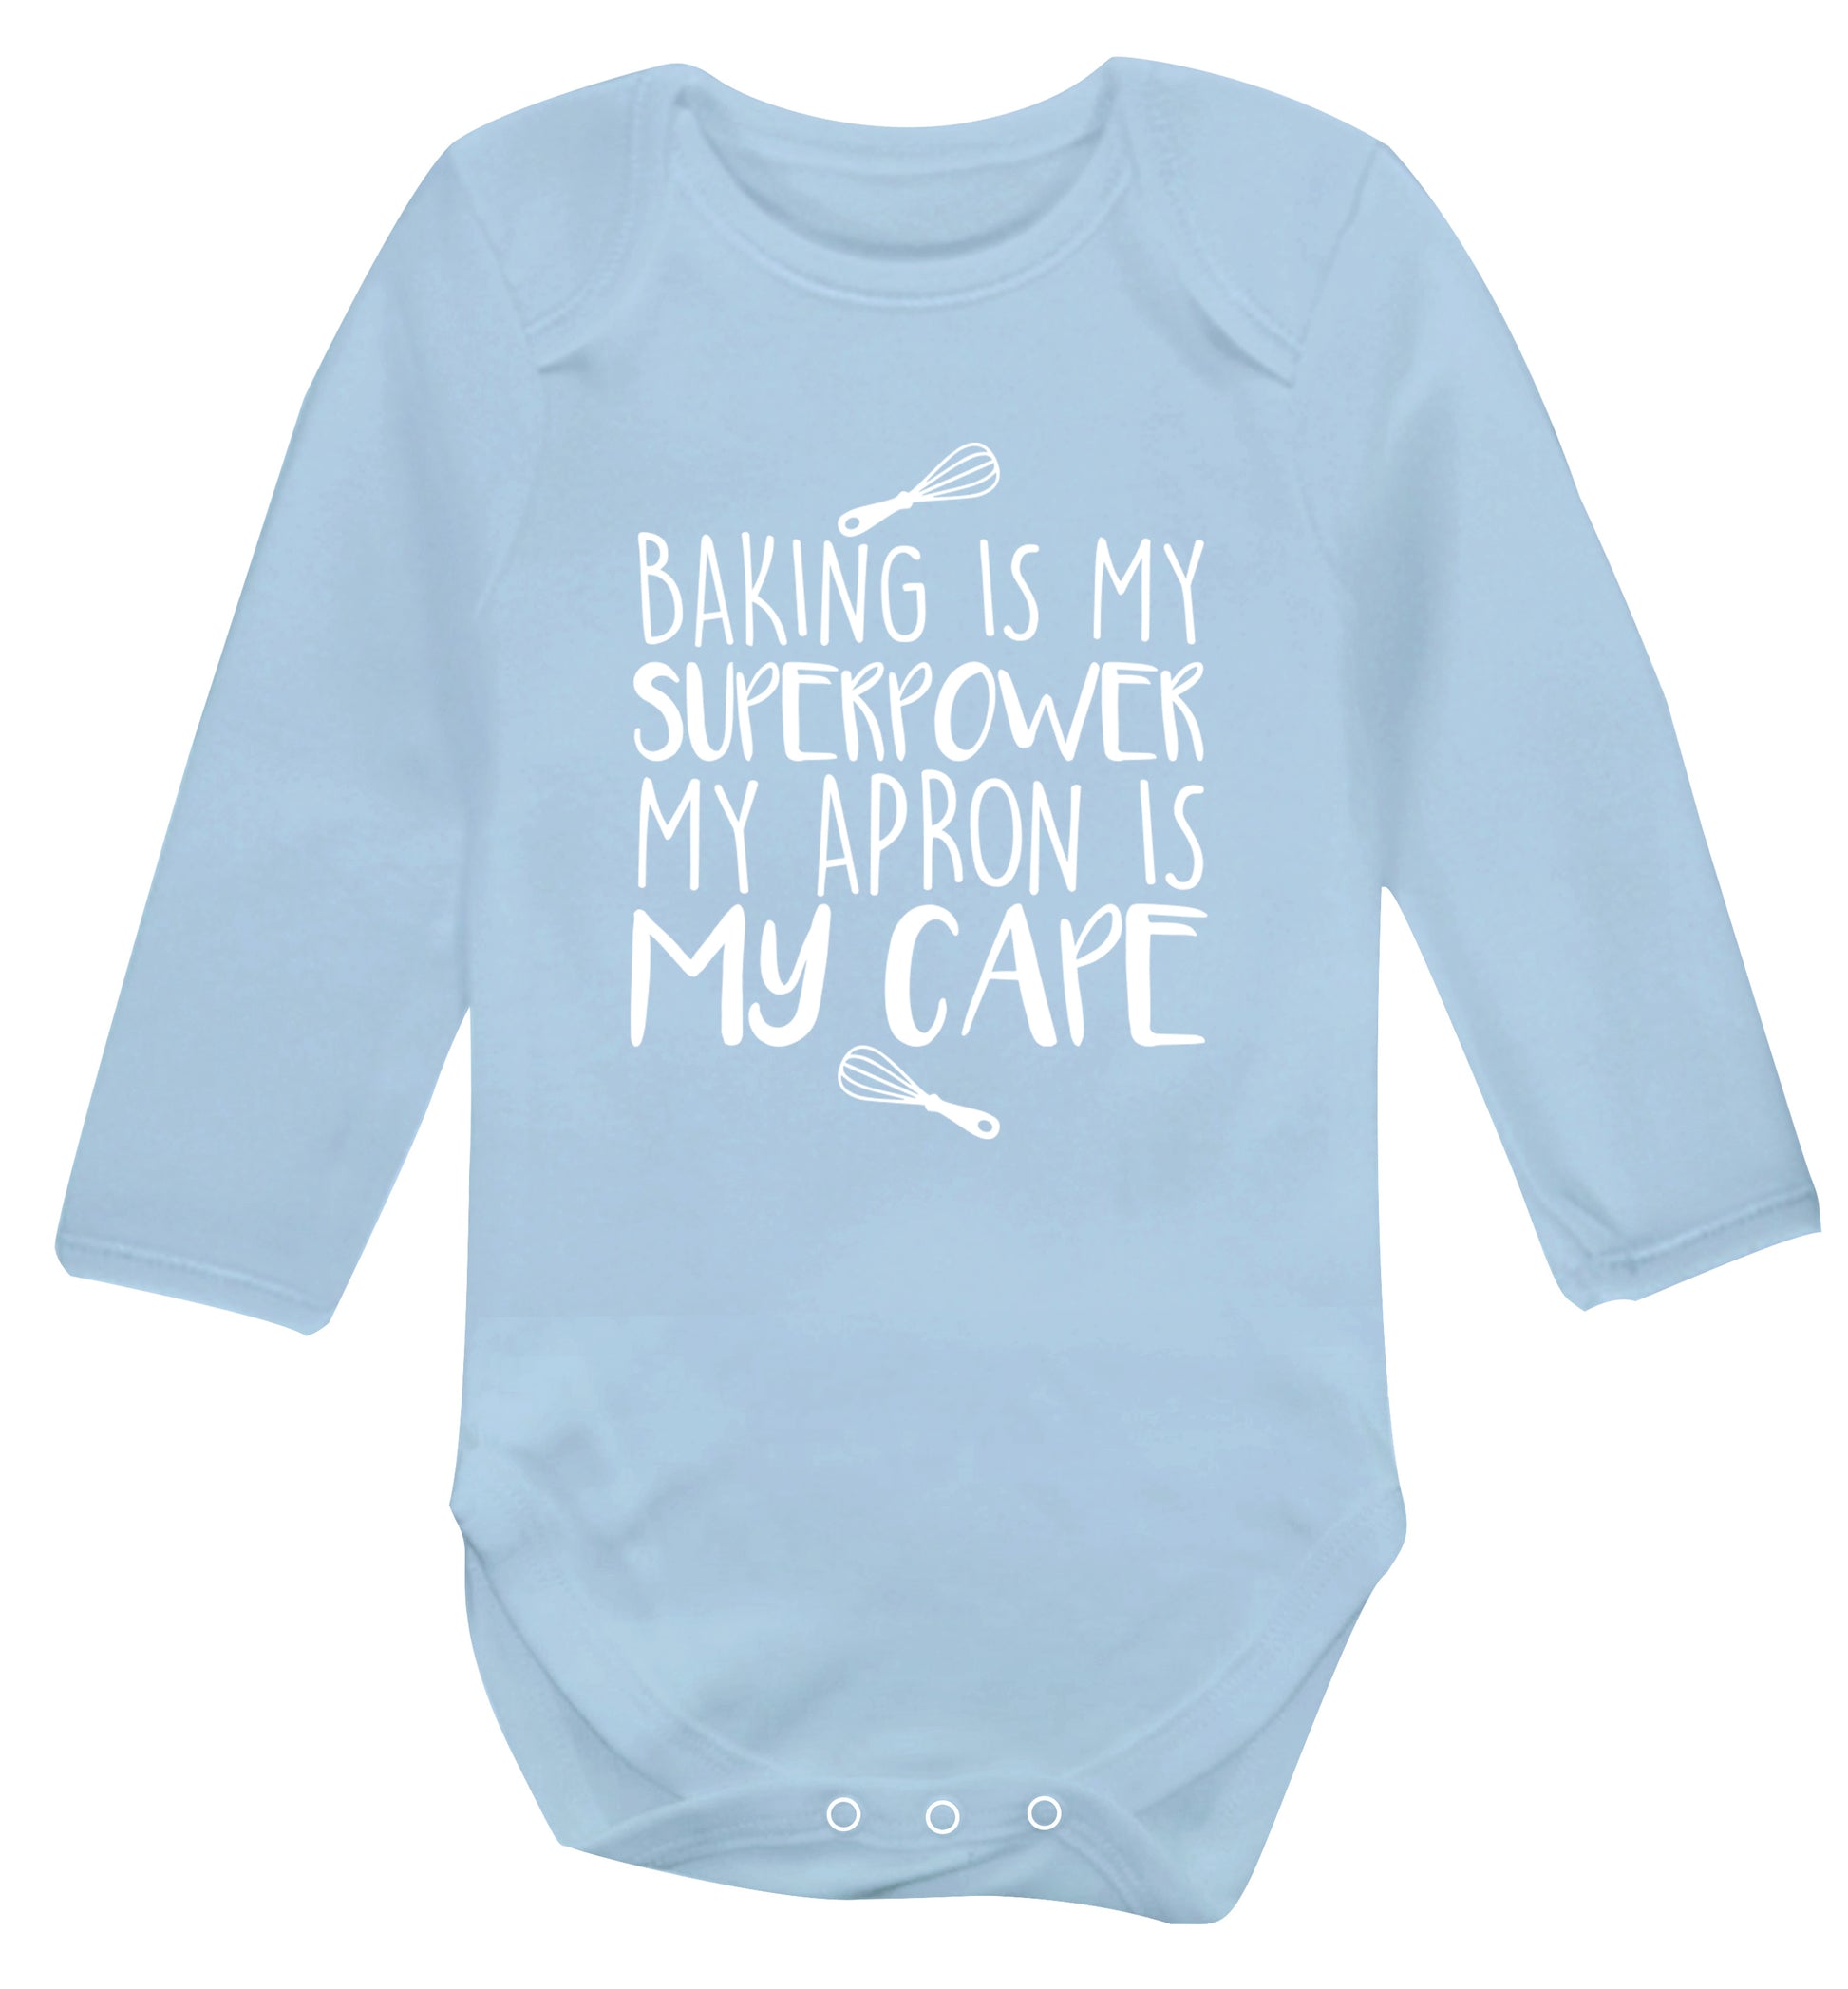 Baking is my superpower my apron is my cape Baby Vest long sleeved pale blue 6-12 months